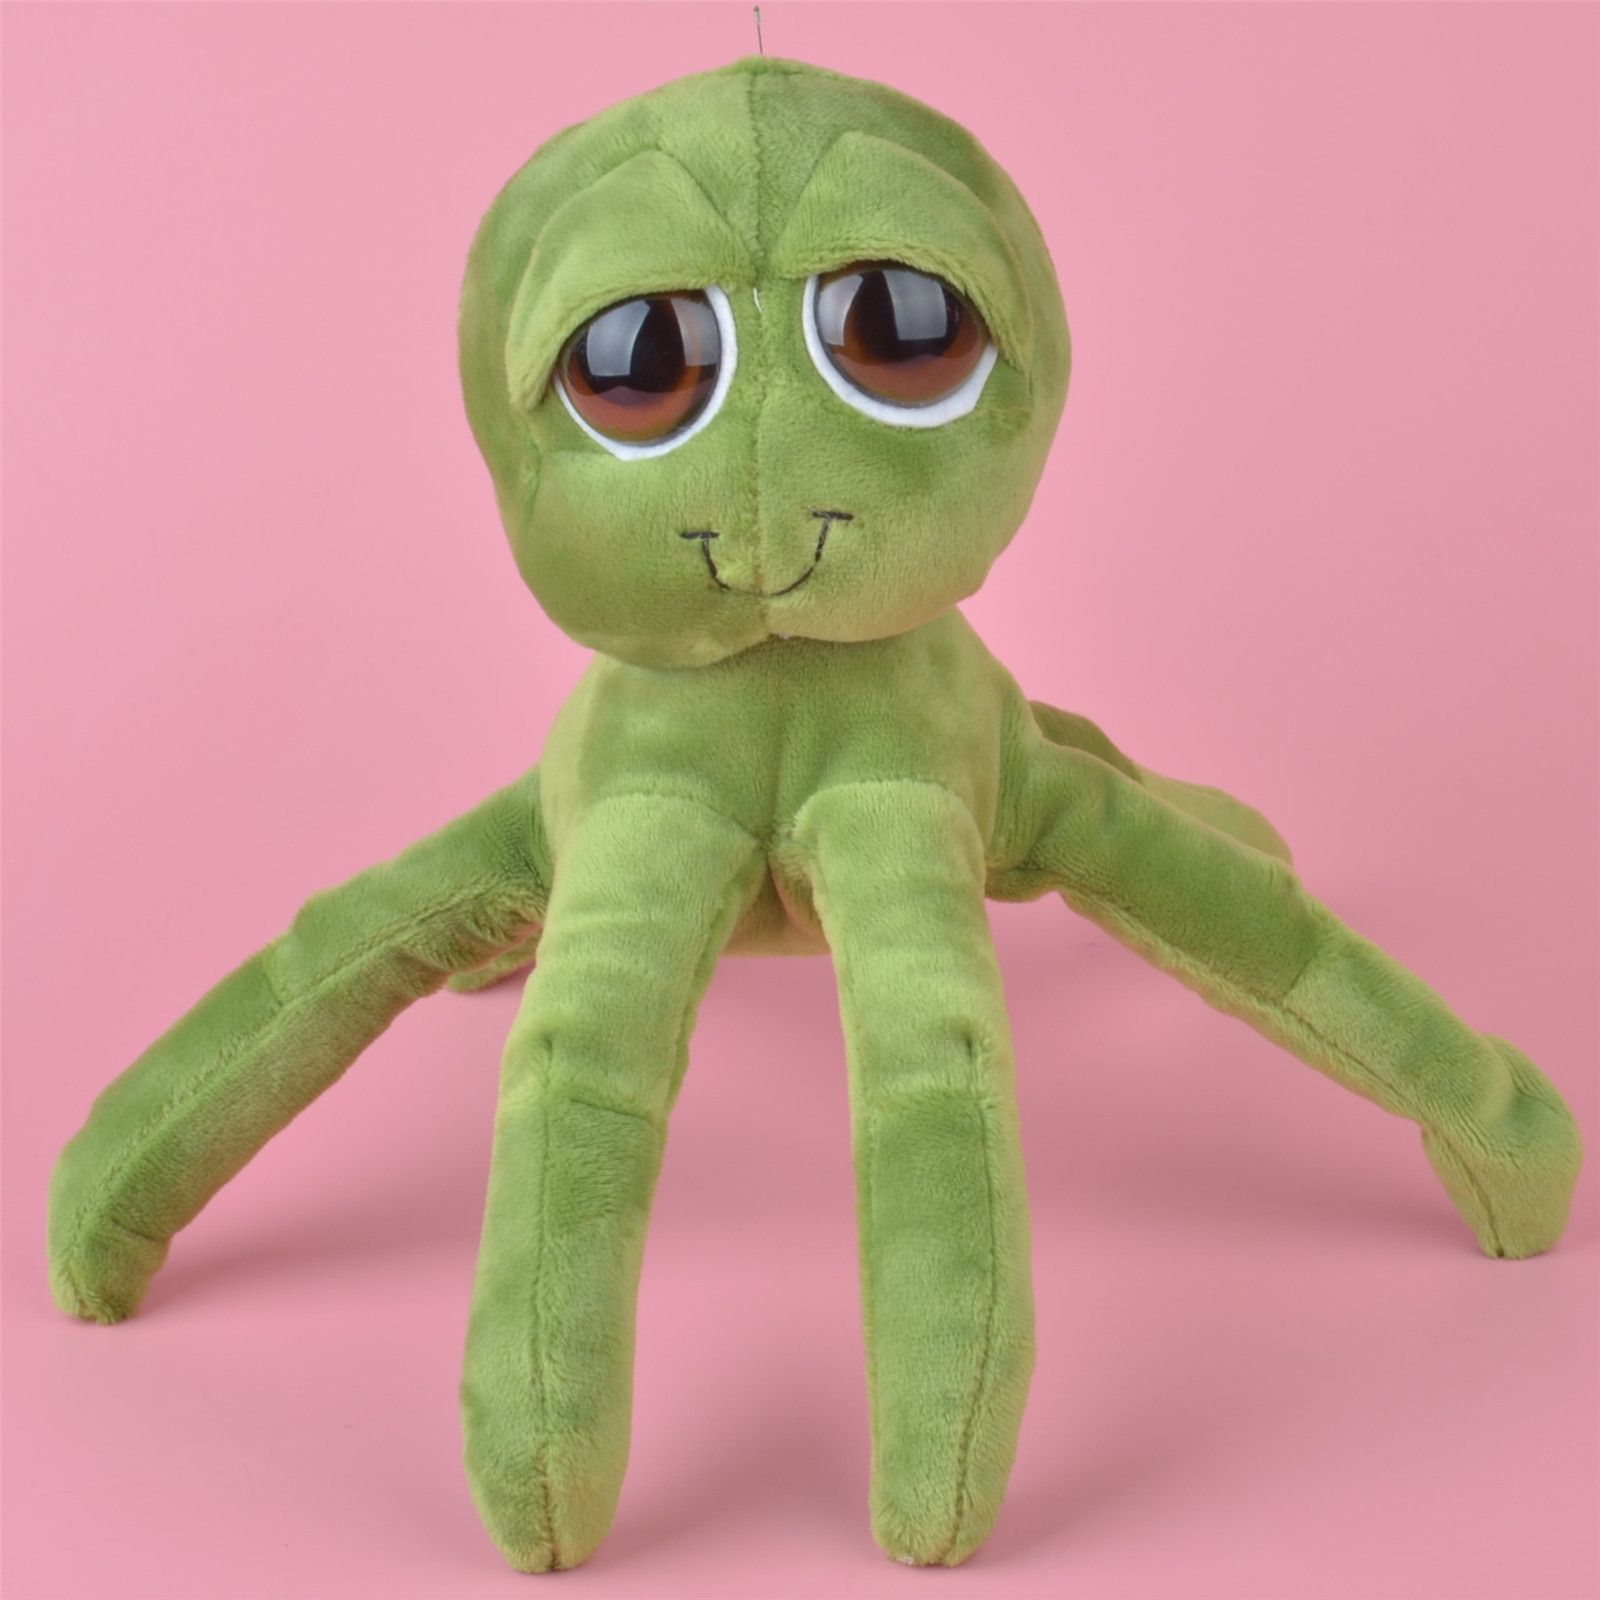 green octopus toy